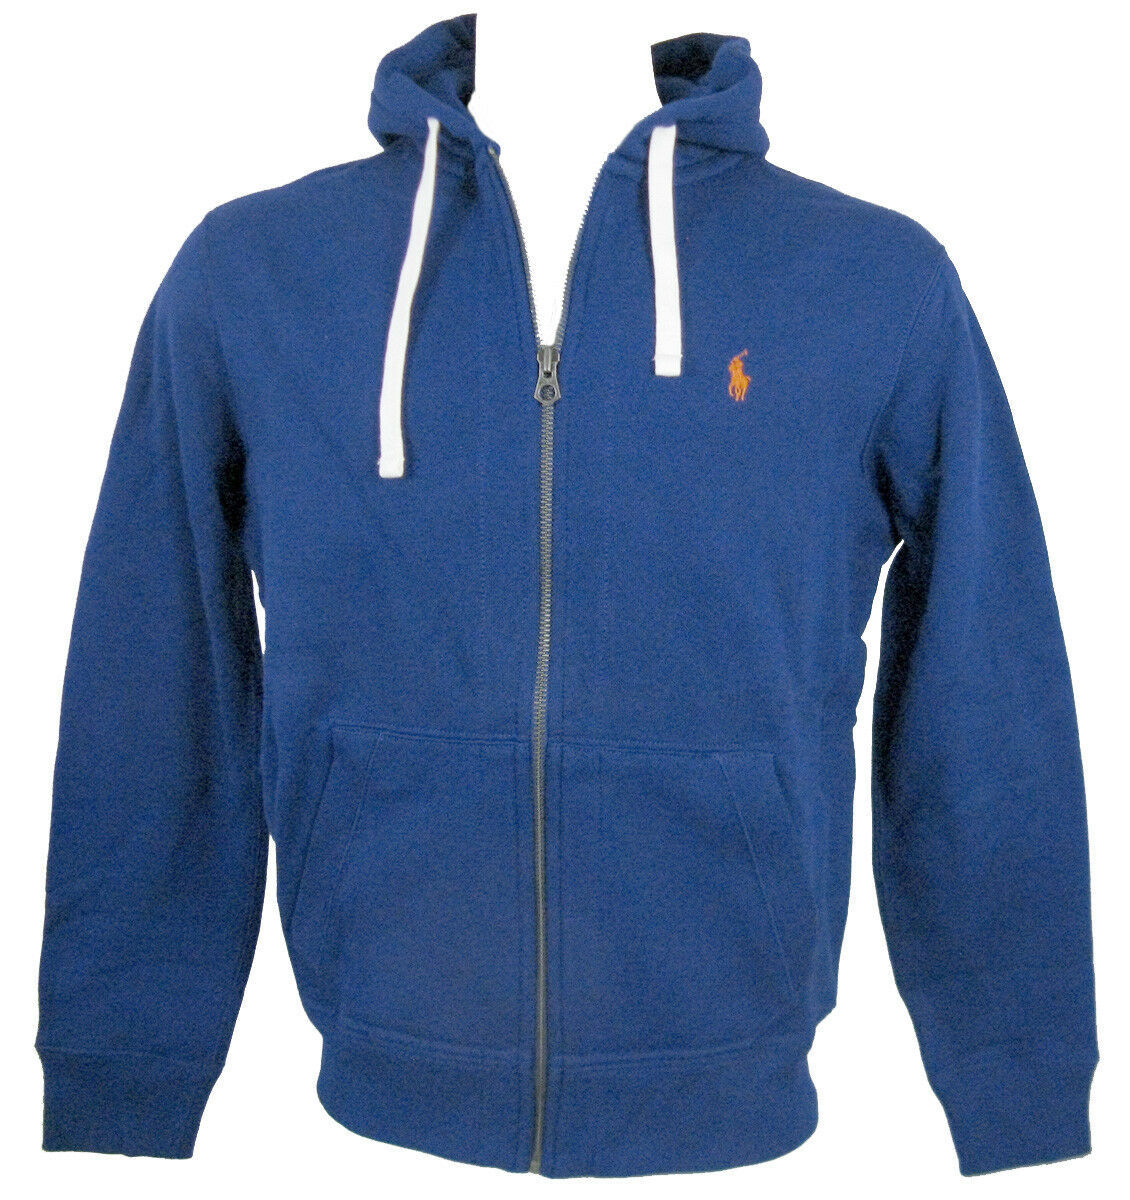 Primary image for NEW Polo Ralph Lauren Hoodie Sweatshirt!  Large  Blue With Orange Polo Player